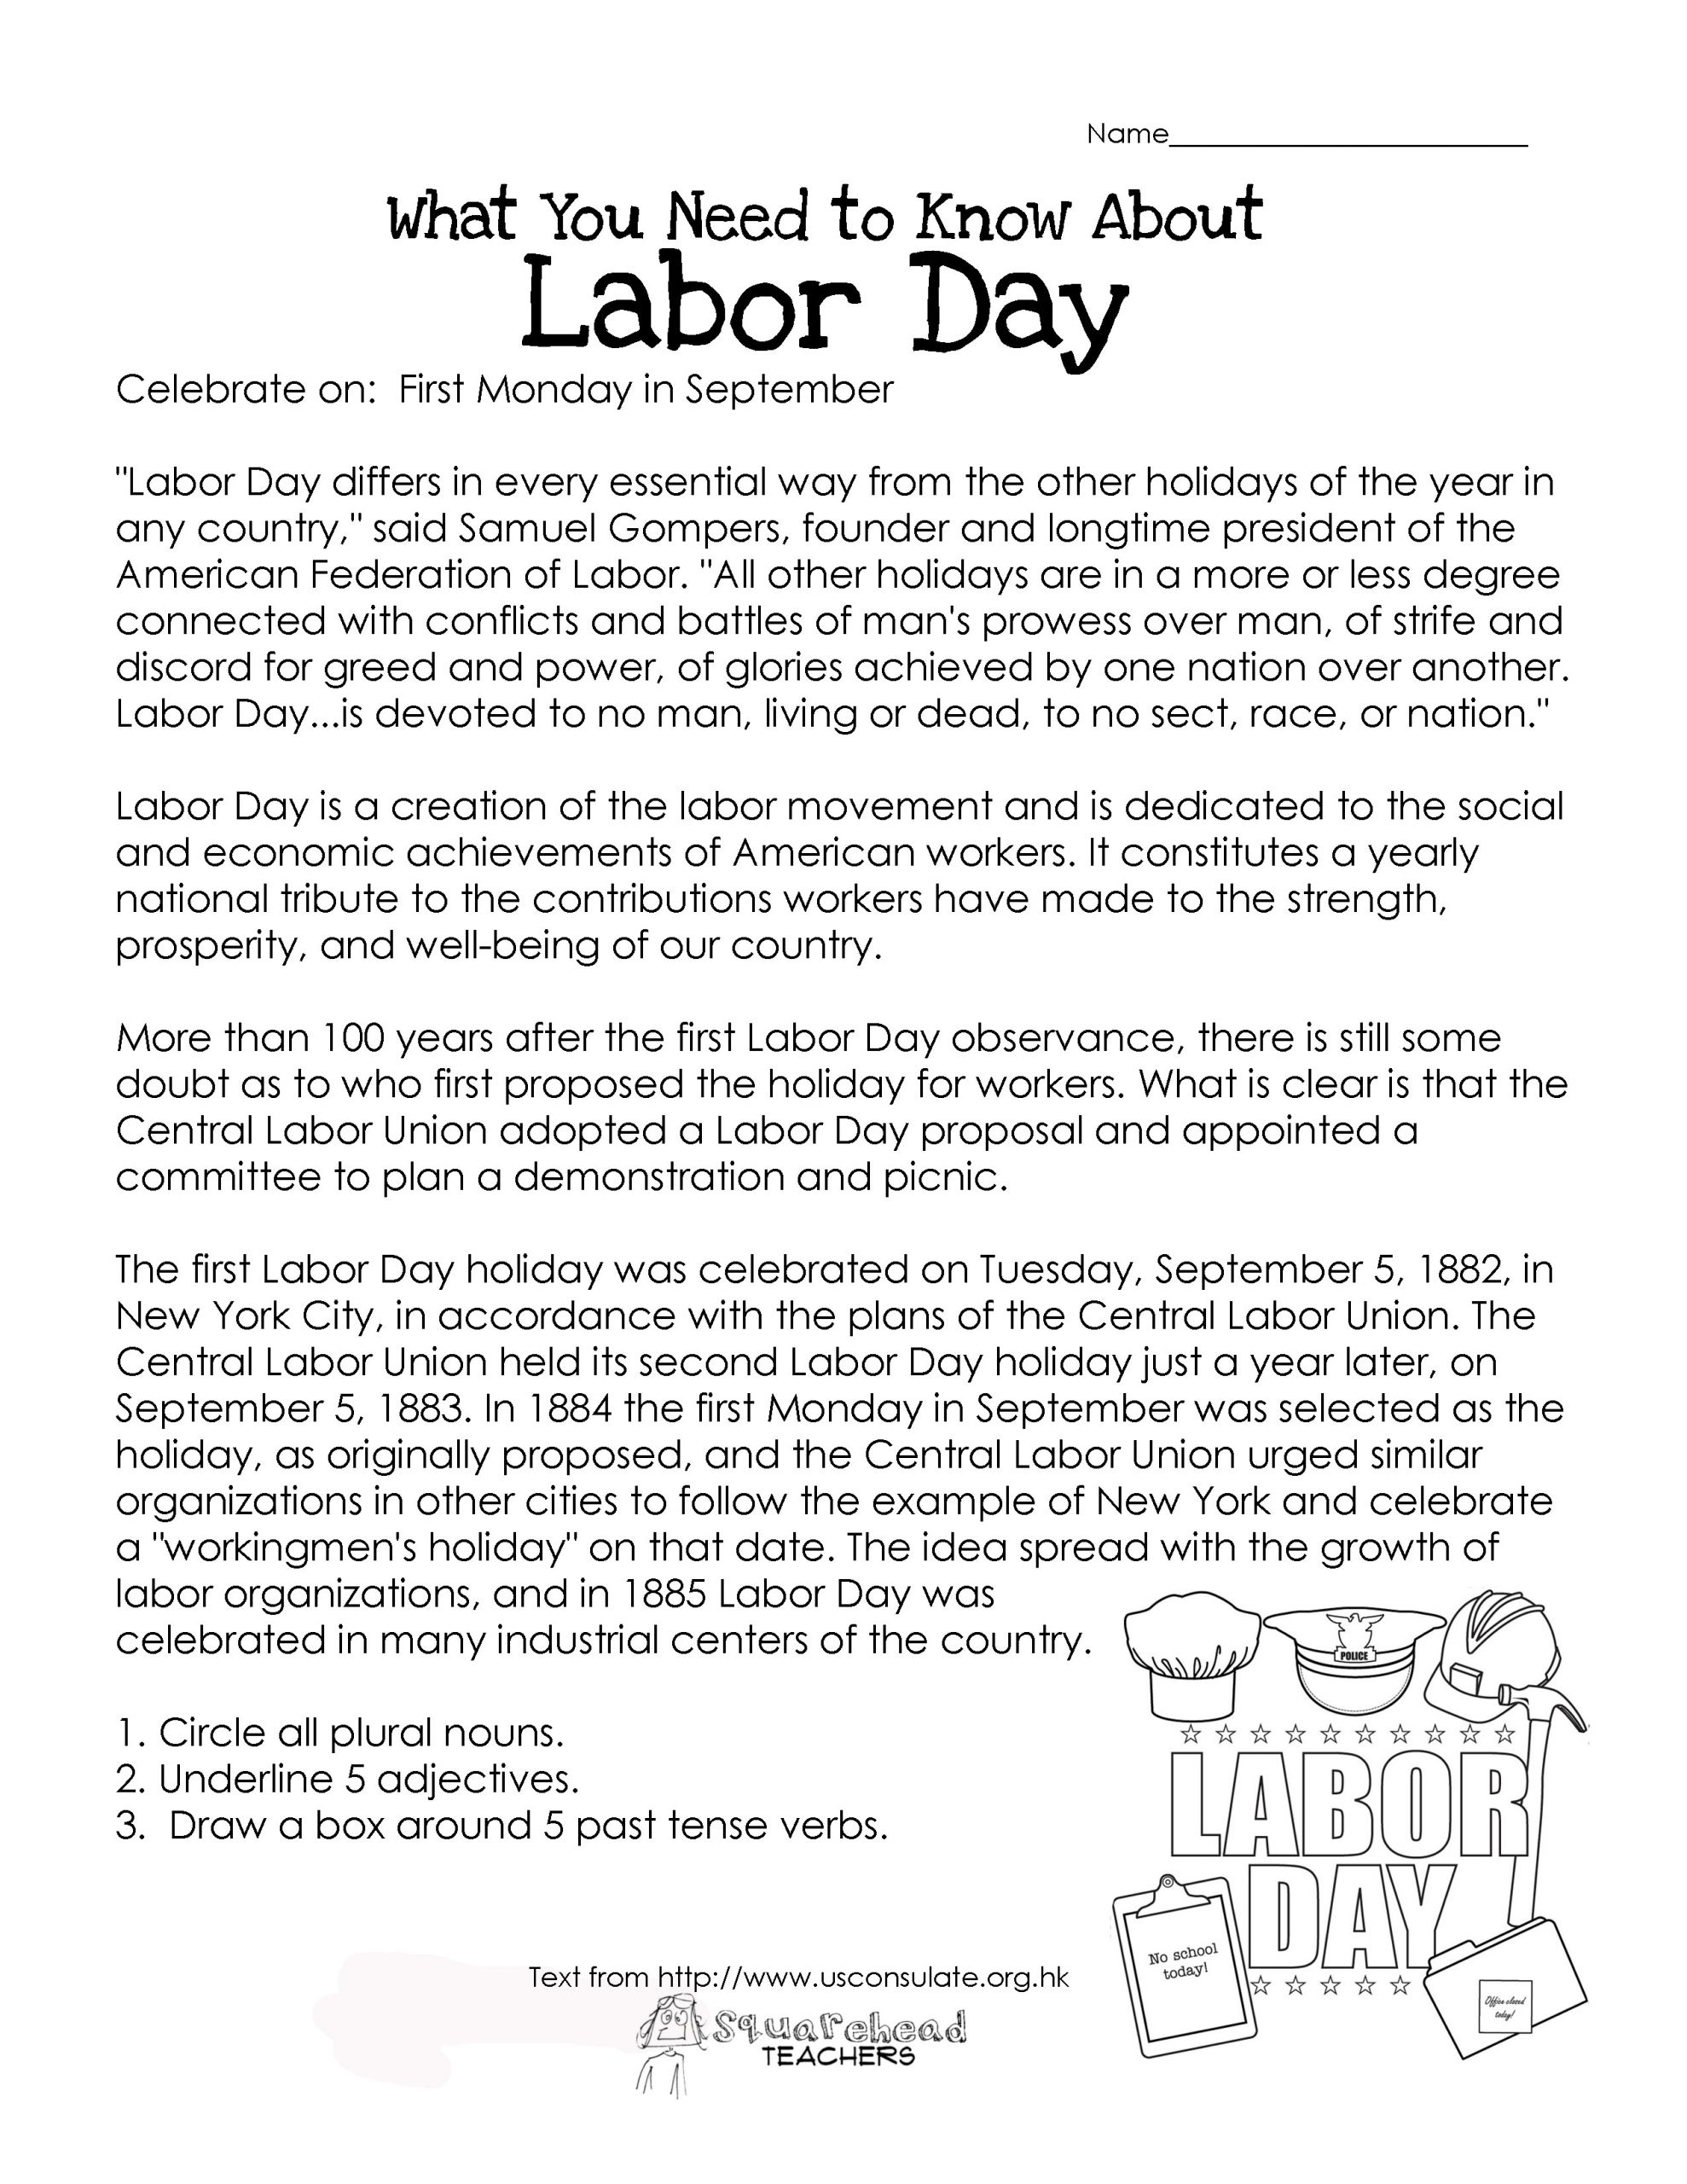 learn-about-labor-day-with-free-printables-rec-therapy-homeschool